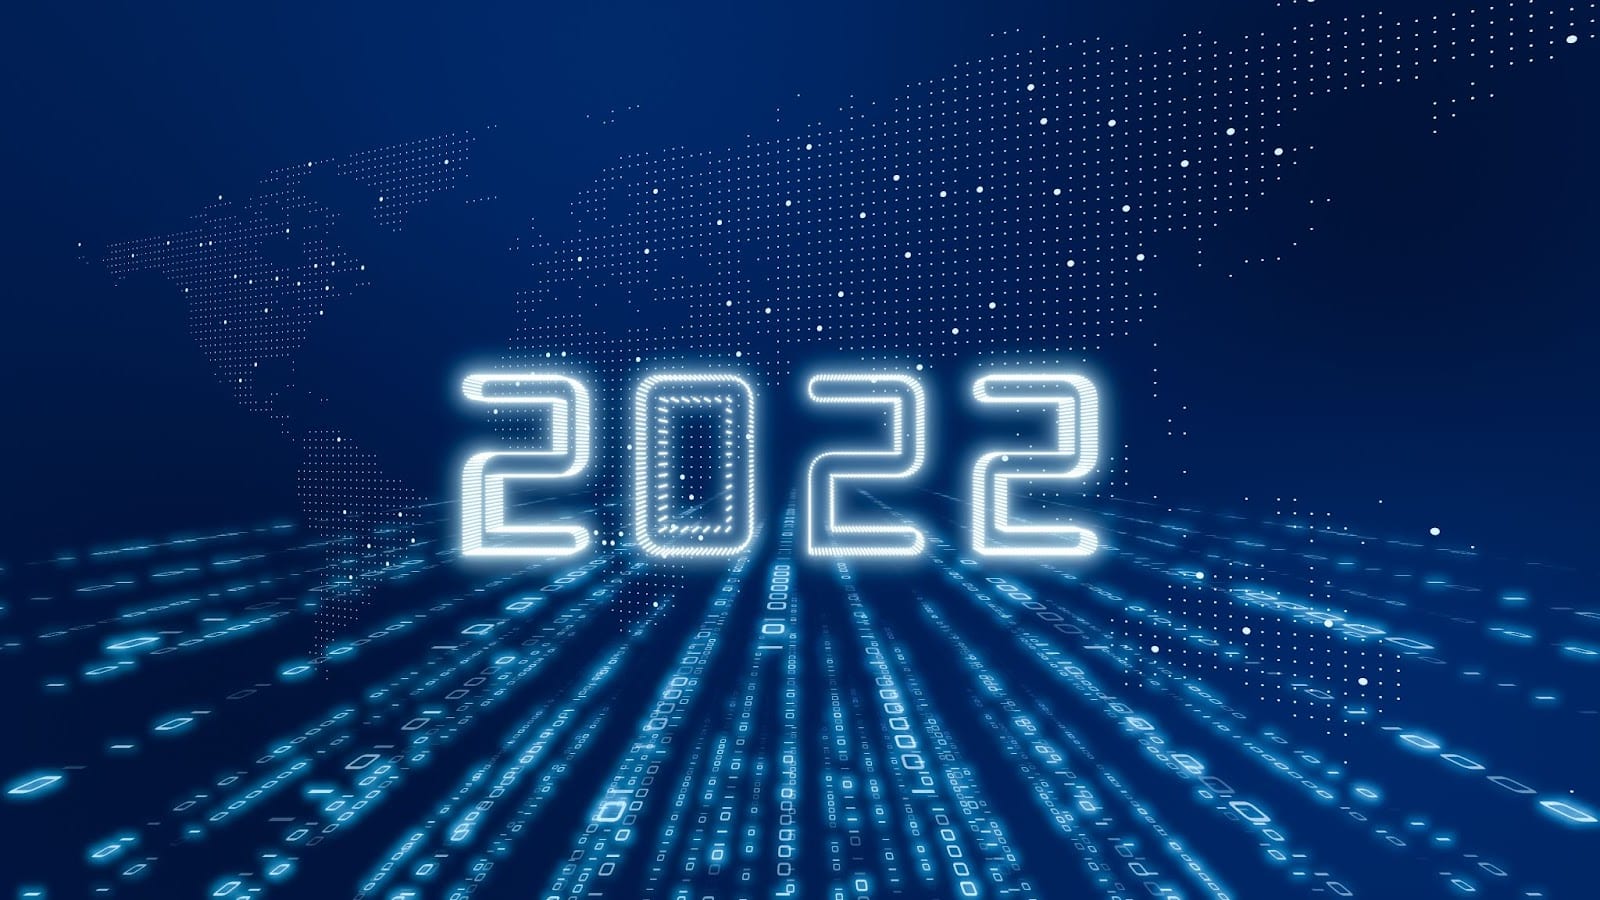 3 Tips for Facing the Harsh Truths of Cyber Security in 2022